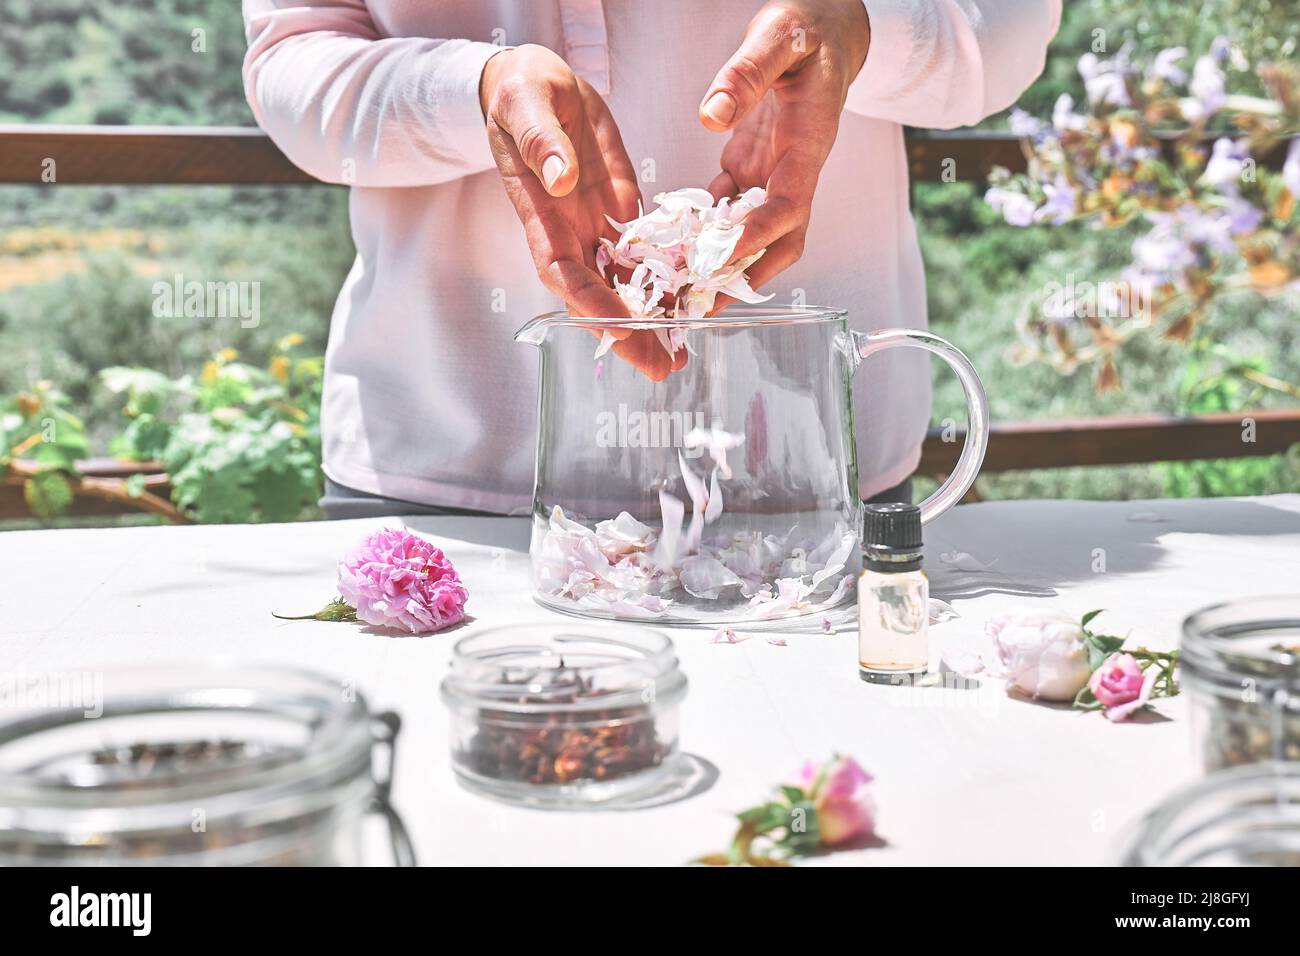 Woman preparing roses water with pink rose petals in glass bowl. Skin care and spa, natural beauty treatment, homemade cosmetics. Stock Photo